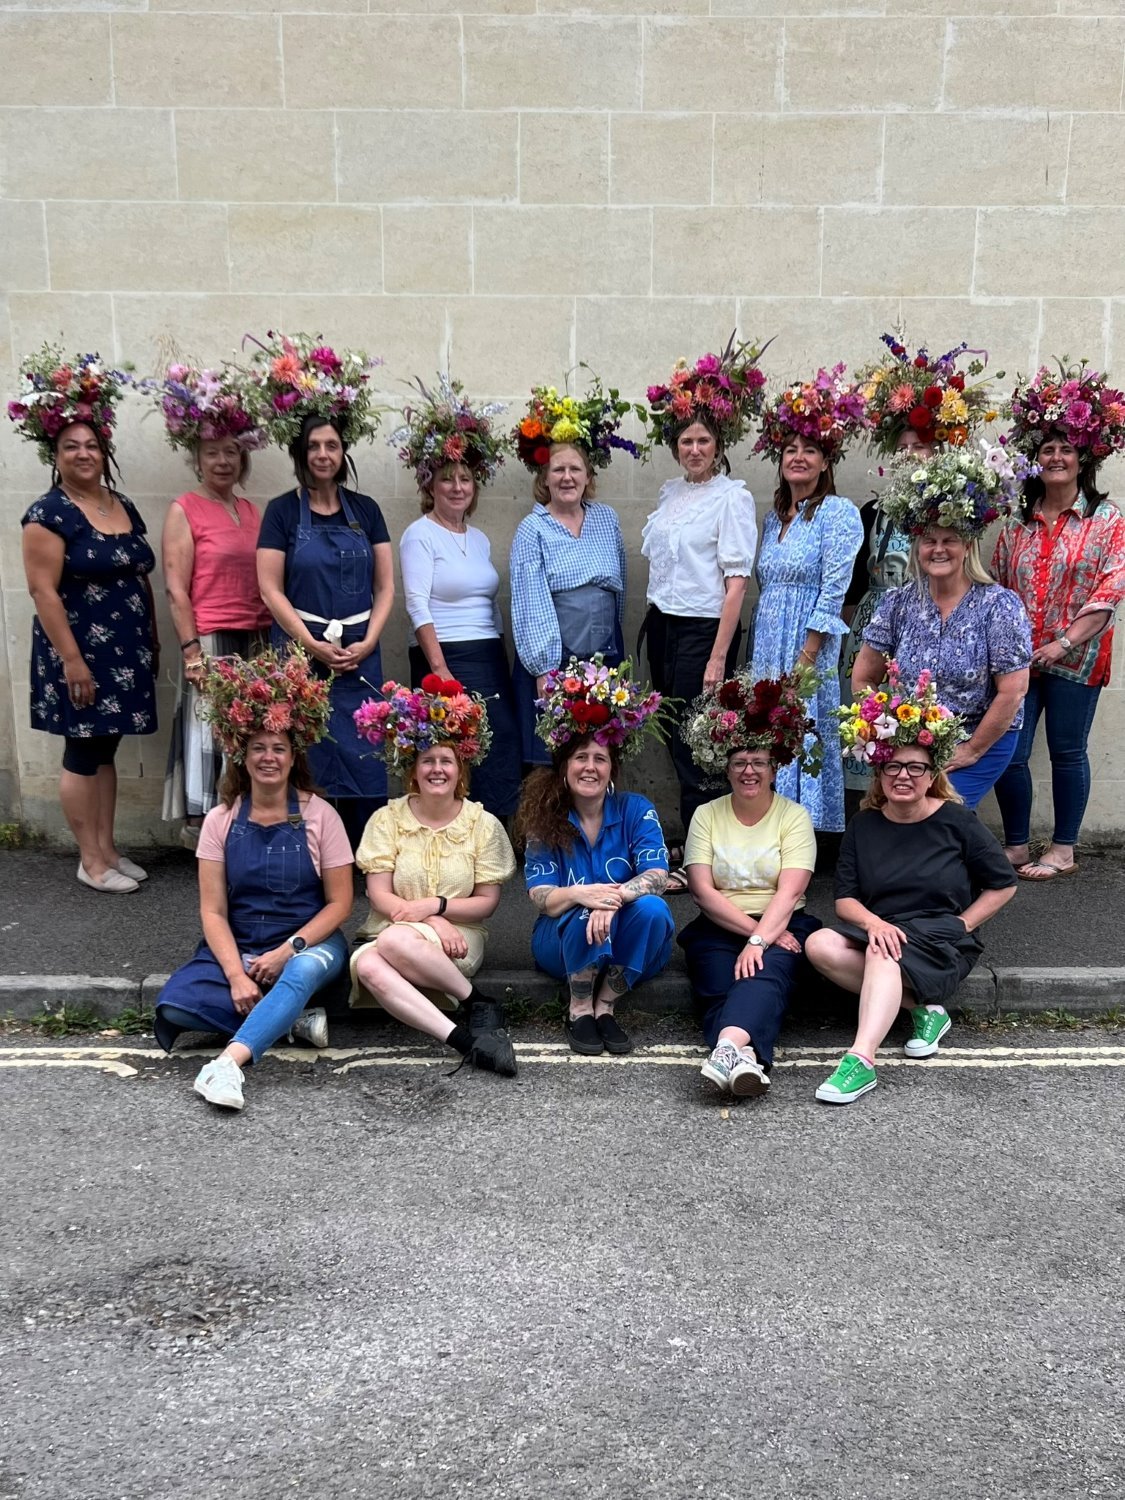 The Bath Flower School students wearing their elaborate flower crowns taught by Sophie Powell, UFLO